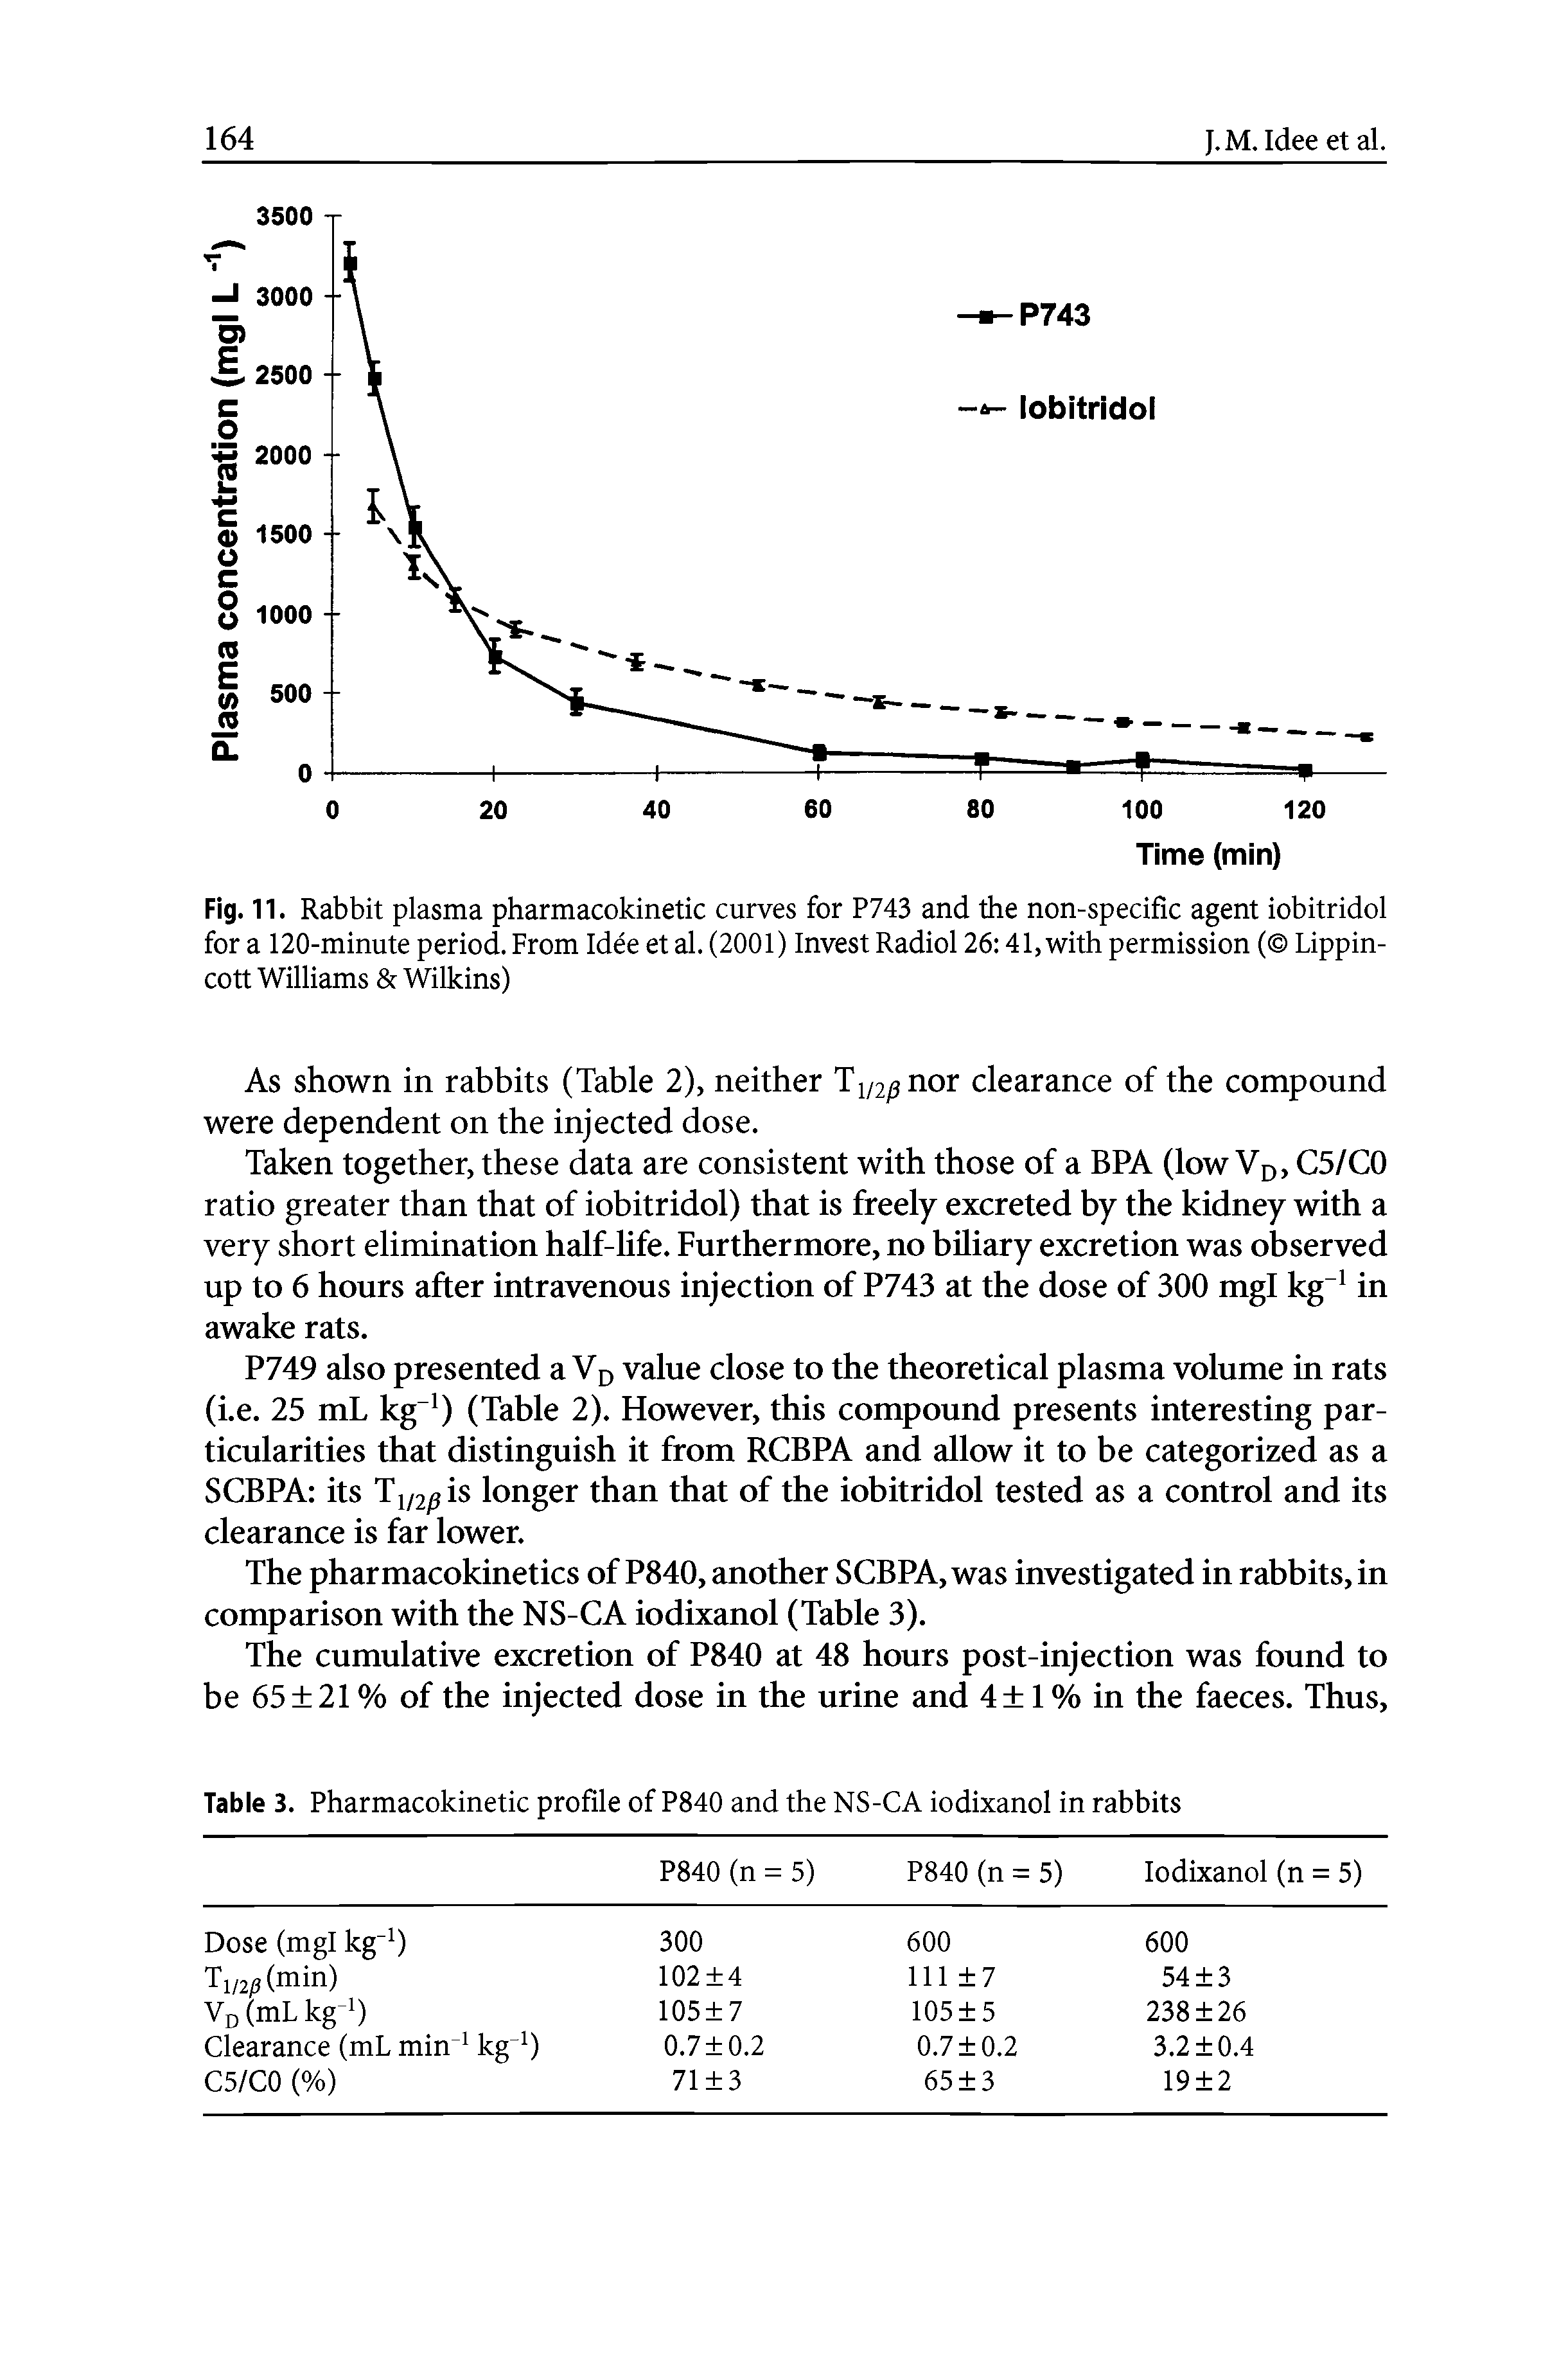 Fig. 11. Rabbit plasma pharmacokinetic curves for P743 and the non-specific agent iobitridol for a 120-minute period. From Idee et al. (2001) Invest Radiol 26 41, with permission ( Lippin-cott Williams Wilkins)...